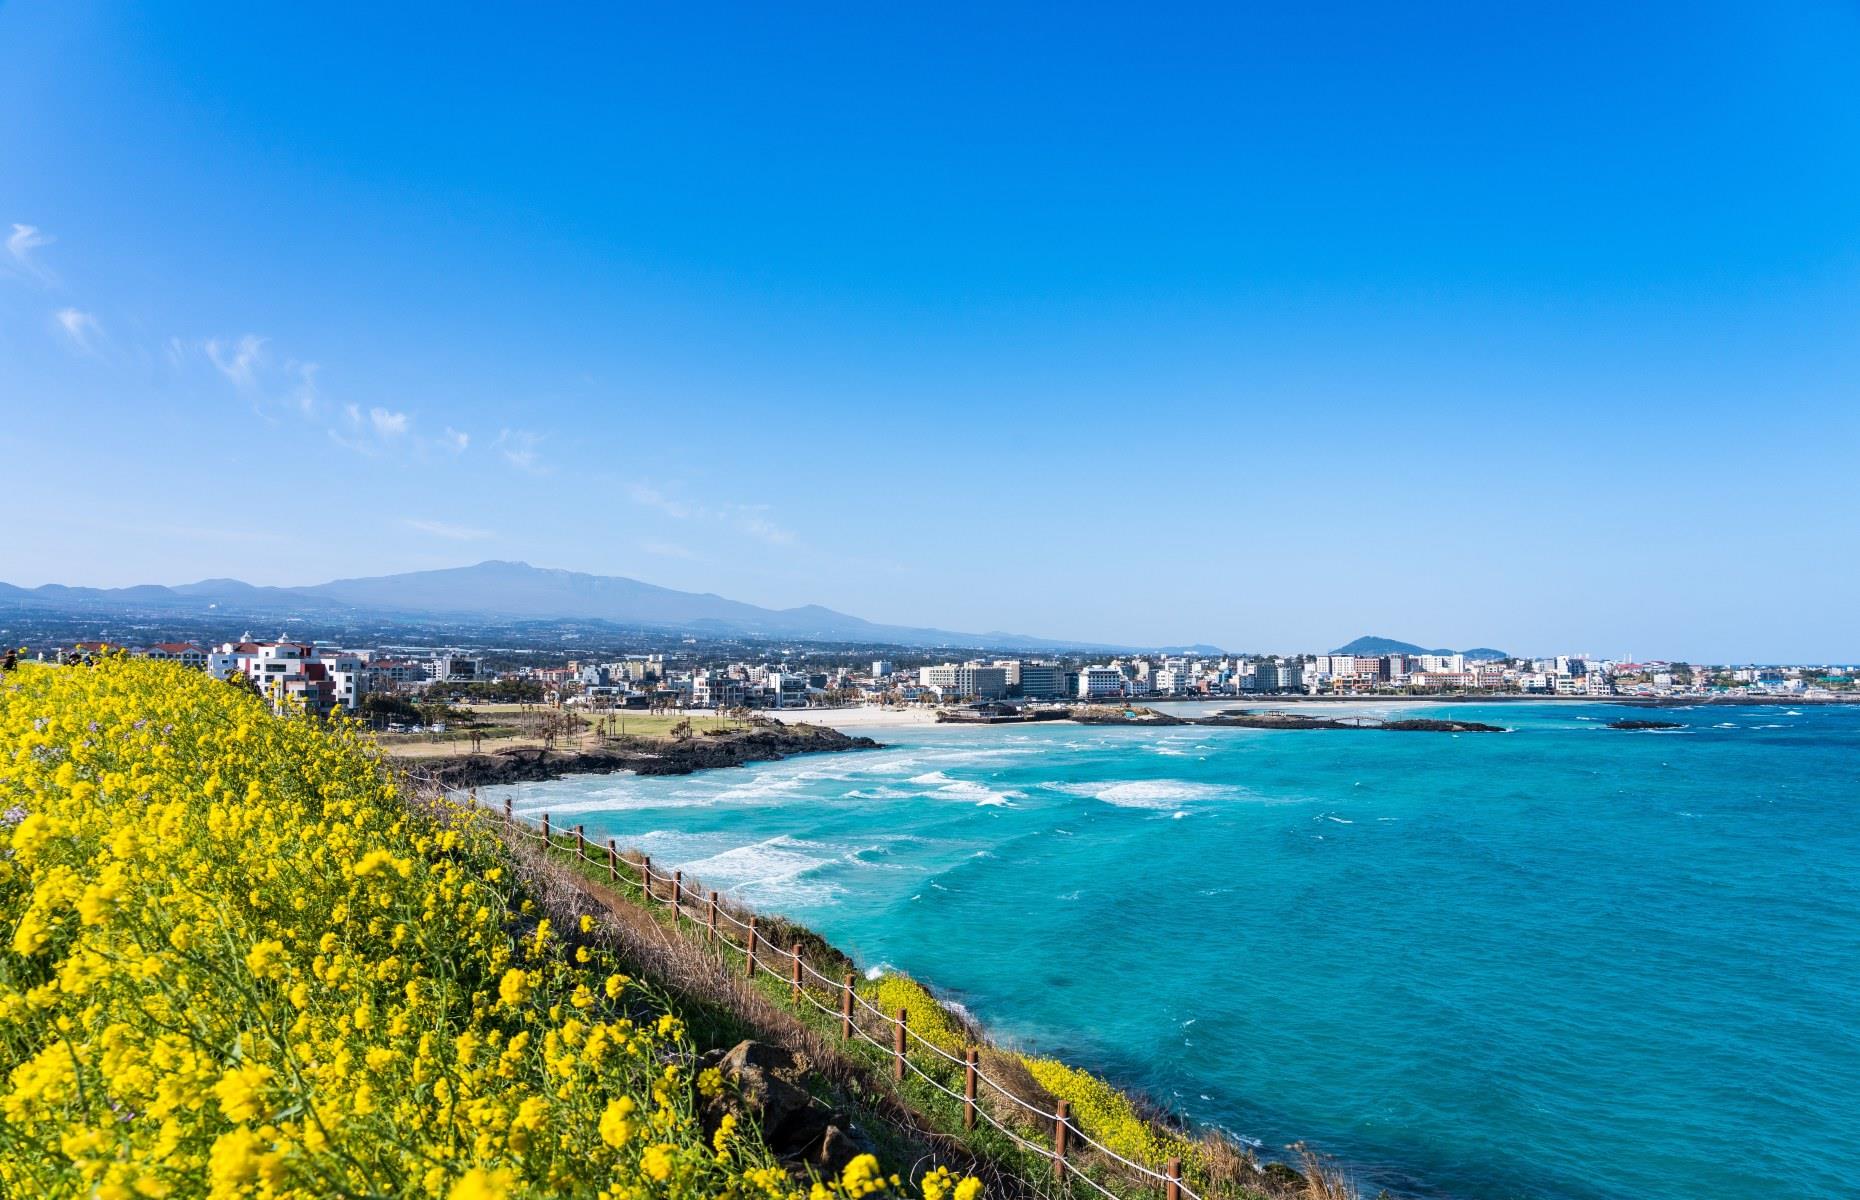 <p>Take a stroll along Hamdeok Beach and see for yourself why it's one of Jeju Island’s best-loved beauty spots. With its blend of pure-white sand, jet-black rock and emerald-blue sea, it’s a dreamy place to spend an afternoon. Go paddling in a rock pool, wander out along a sandbar or hike up the small hillside of terraced fields. Keen for even better views? You can also go paragliding here.</p>